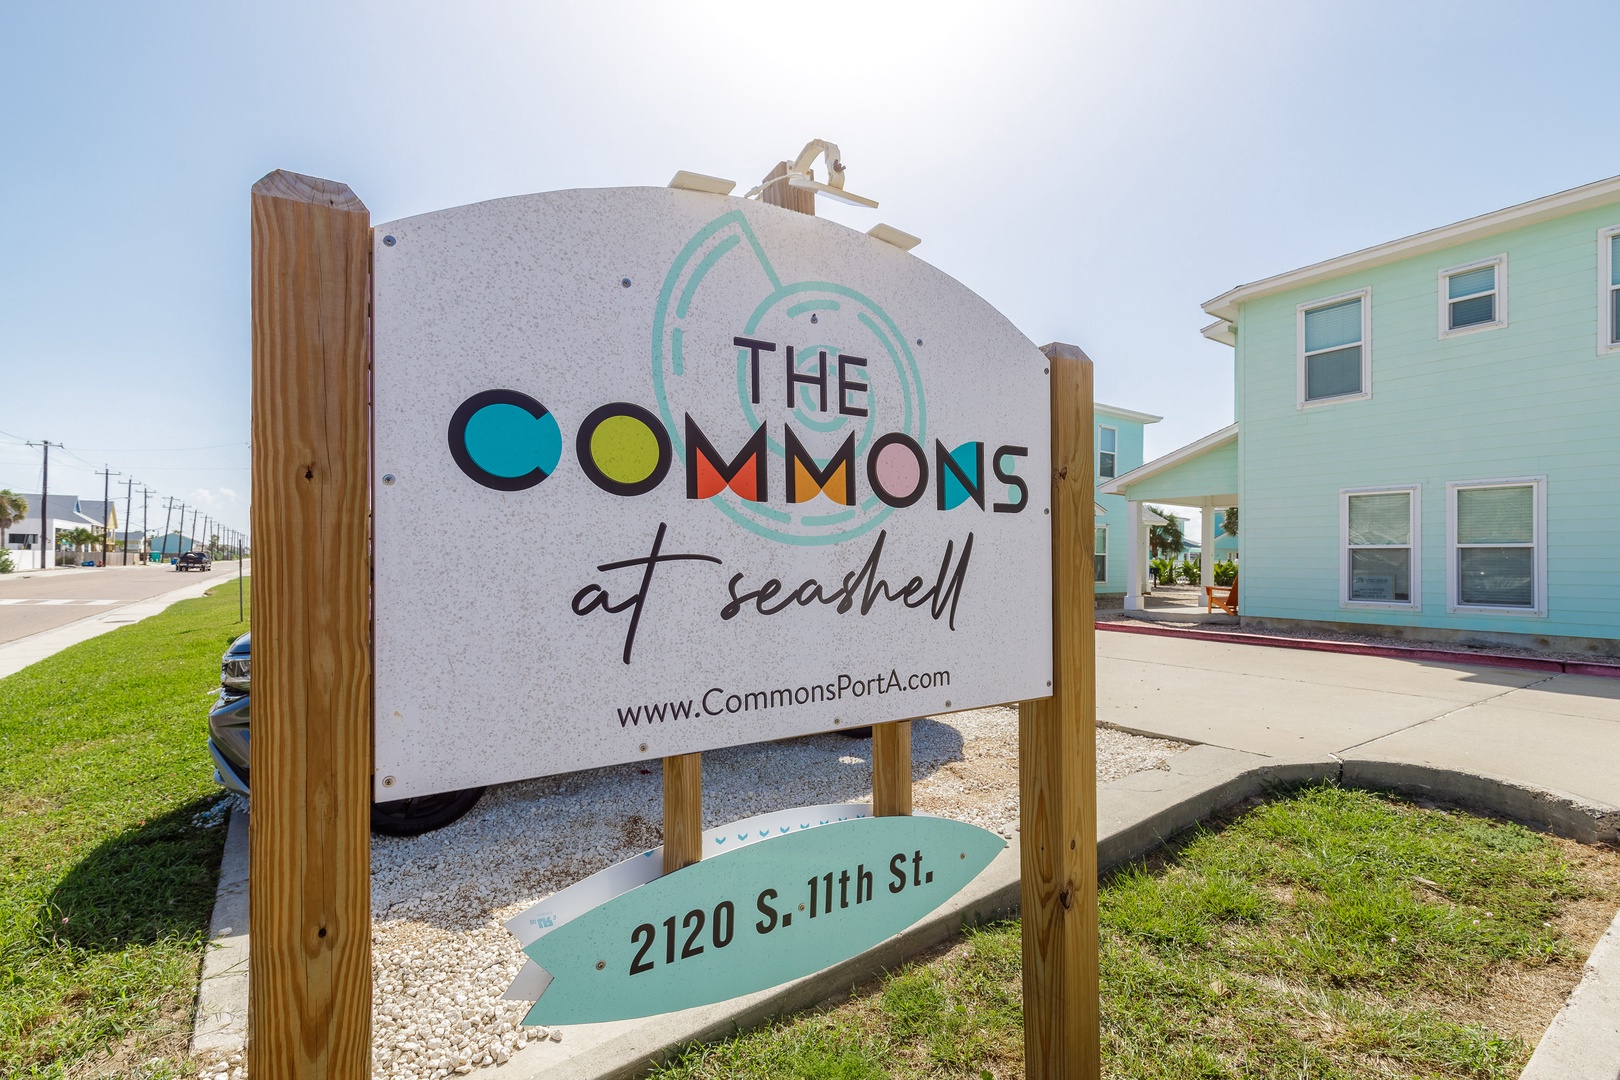 Enjoy your stay in The Commons at Seashell neighborhood